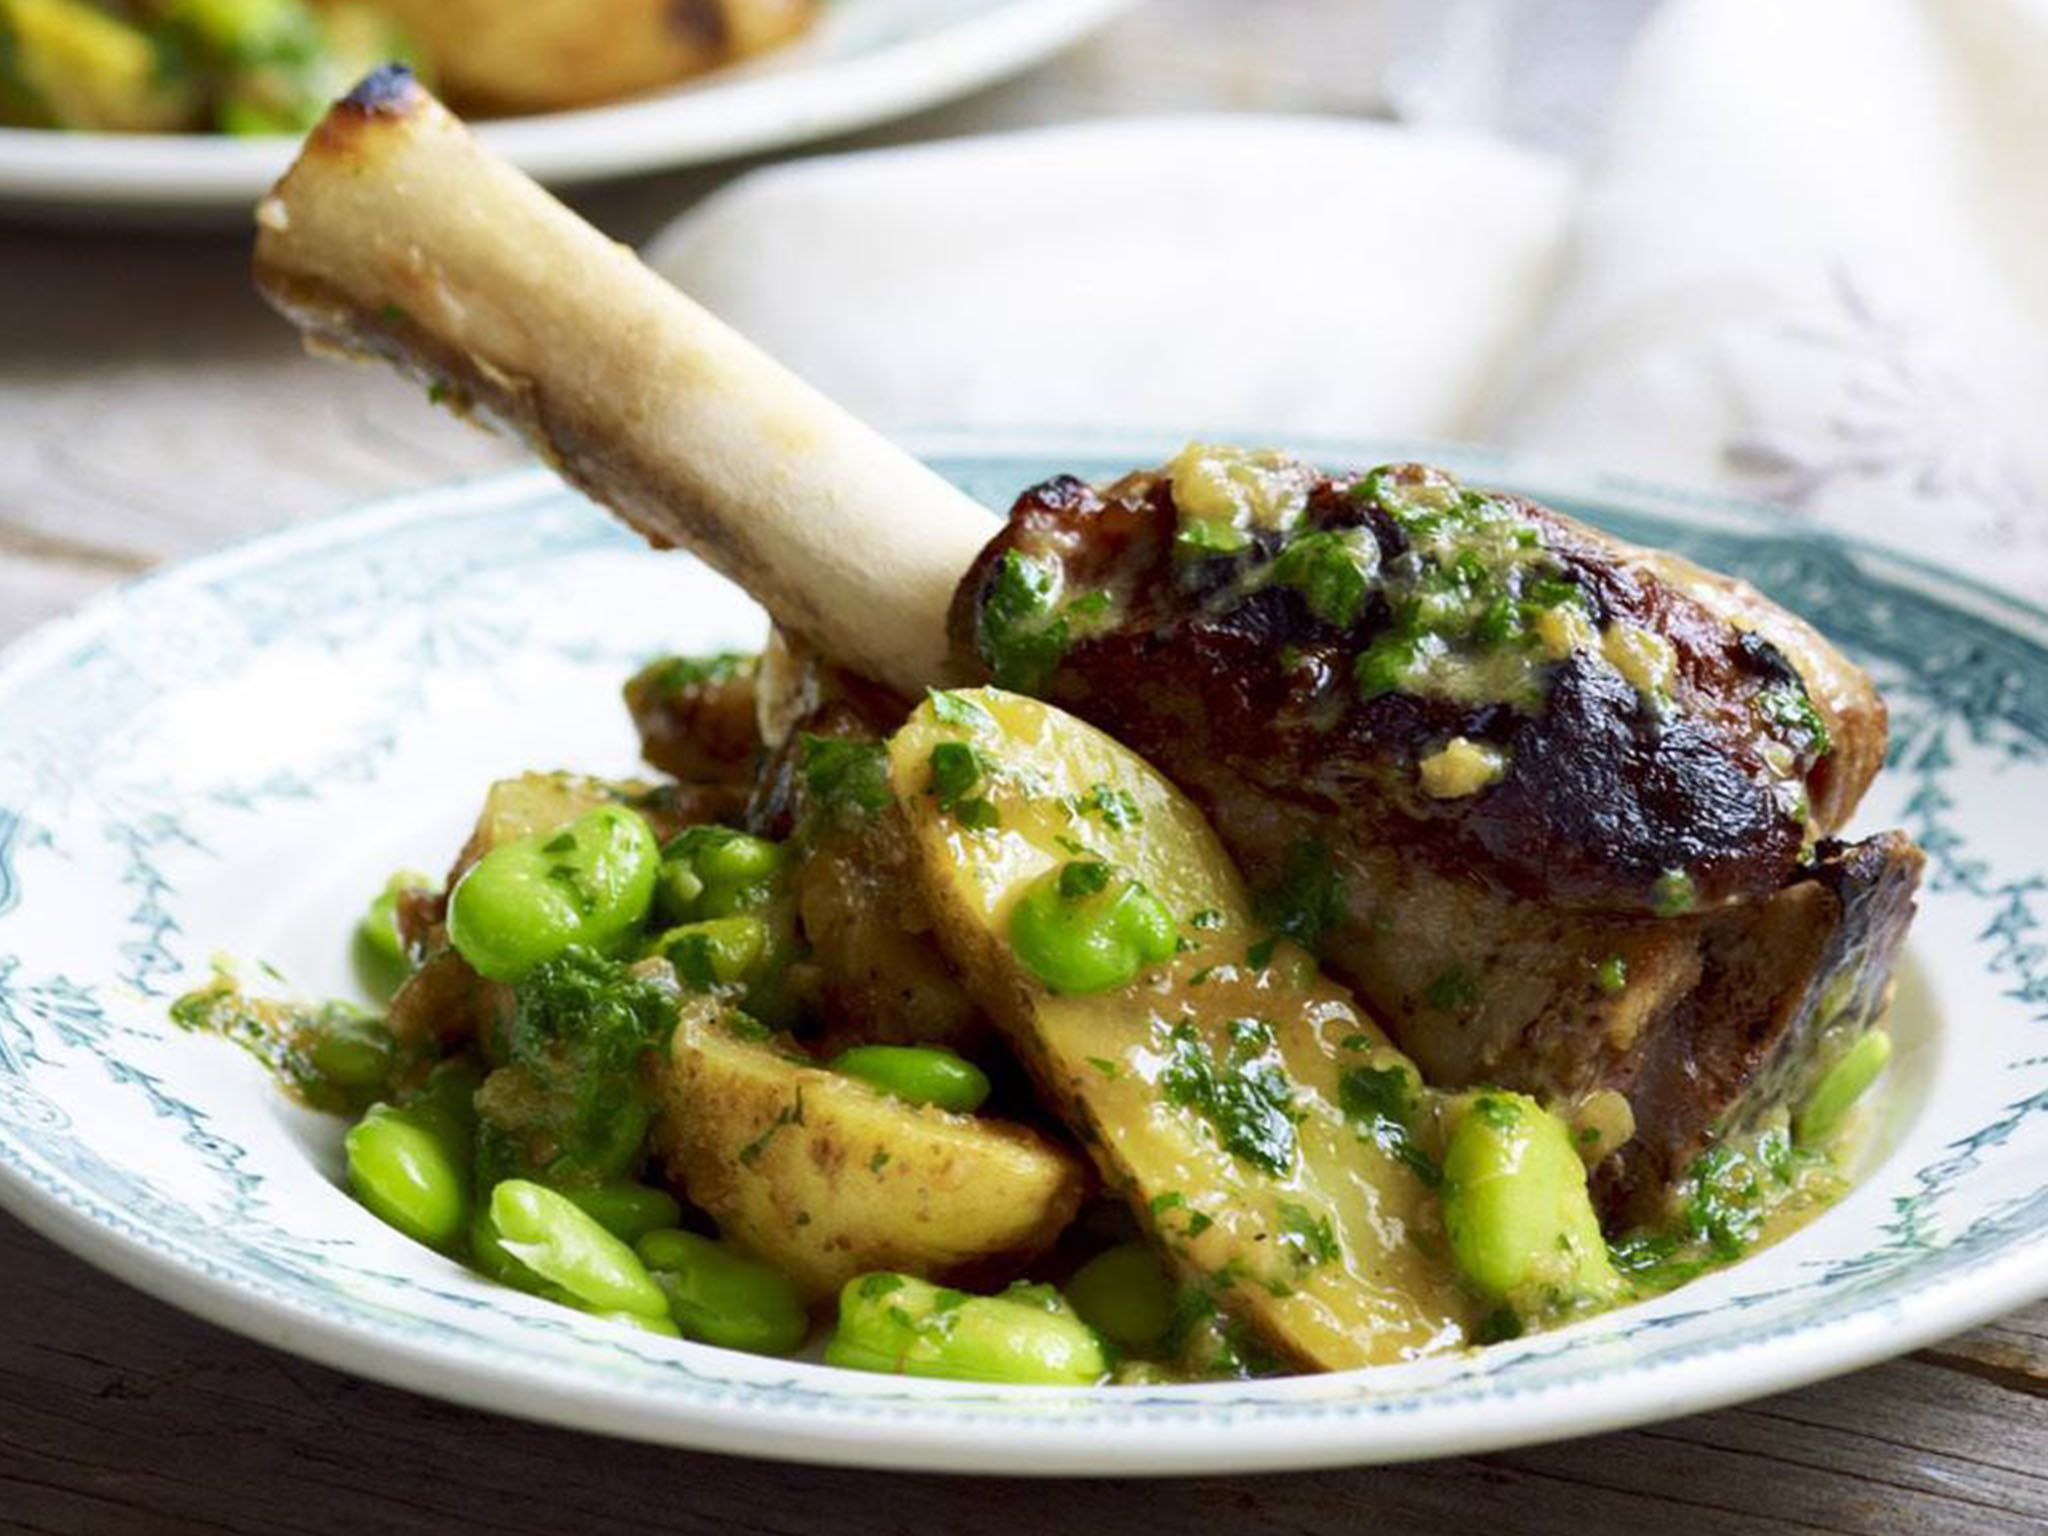 LEMON AND GINGER LAMB SHANKS WITH BROAD BEANS